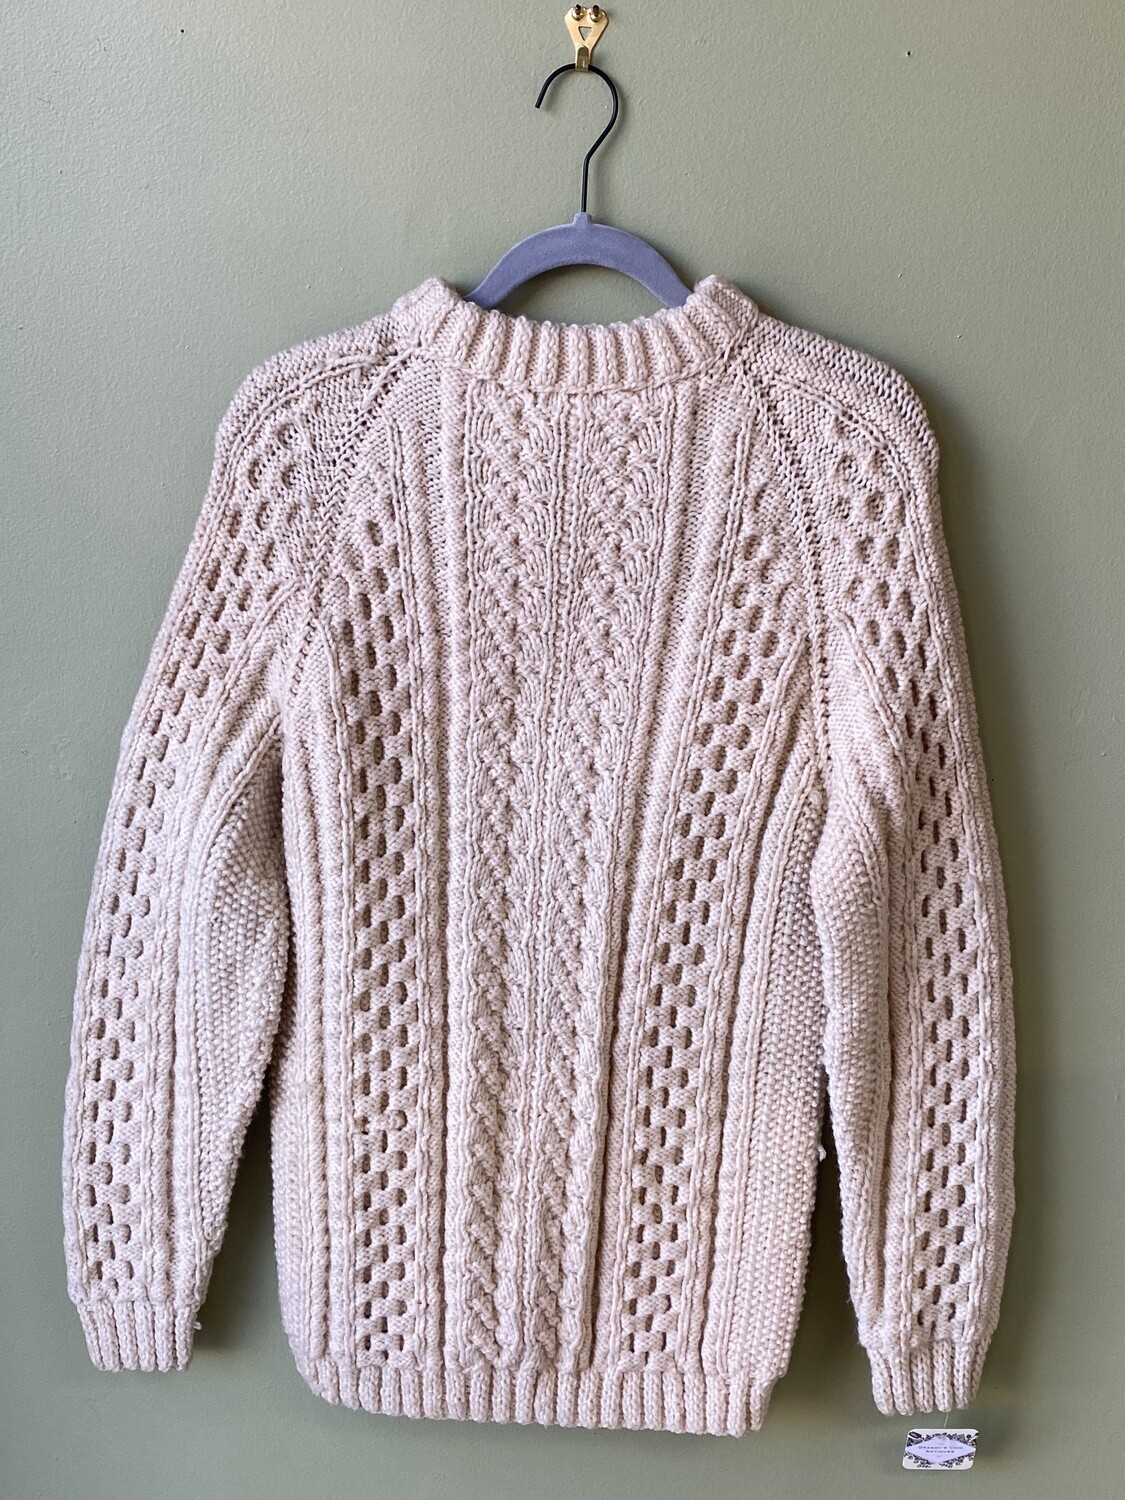 Traditional Woolen Sweater with Drop Sleeve-to-Arm Seams, Estimated Size M/L